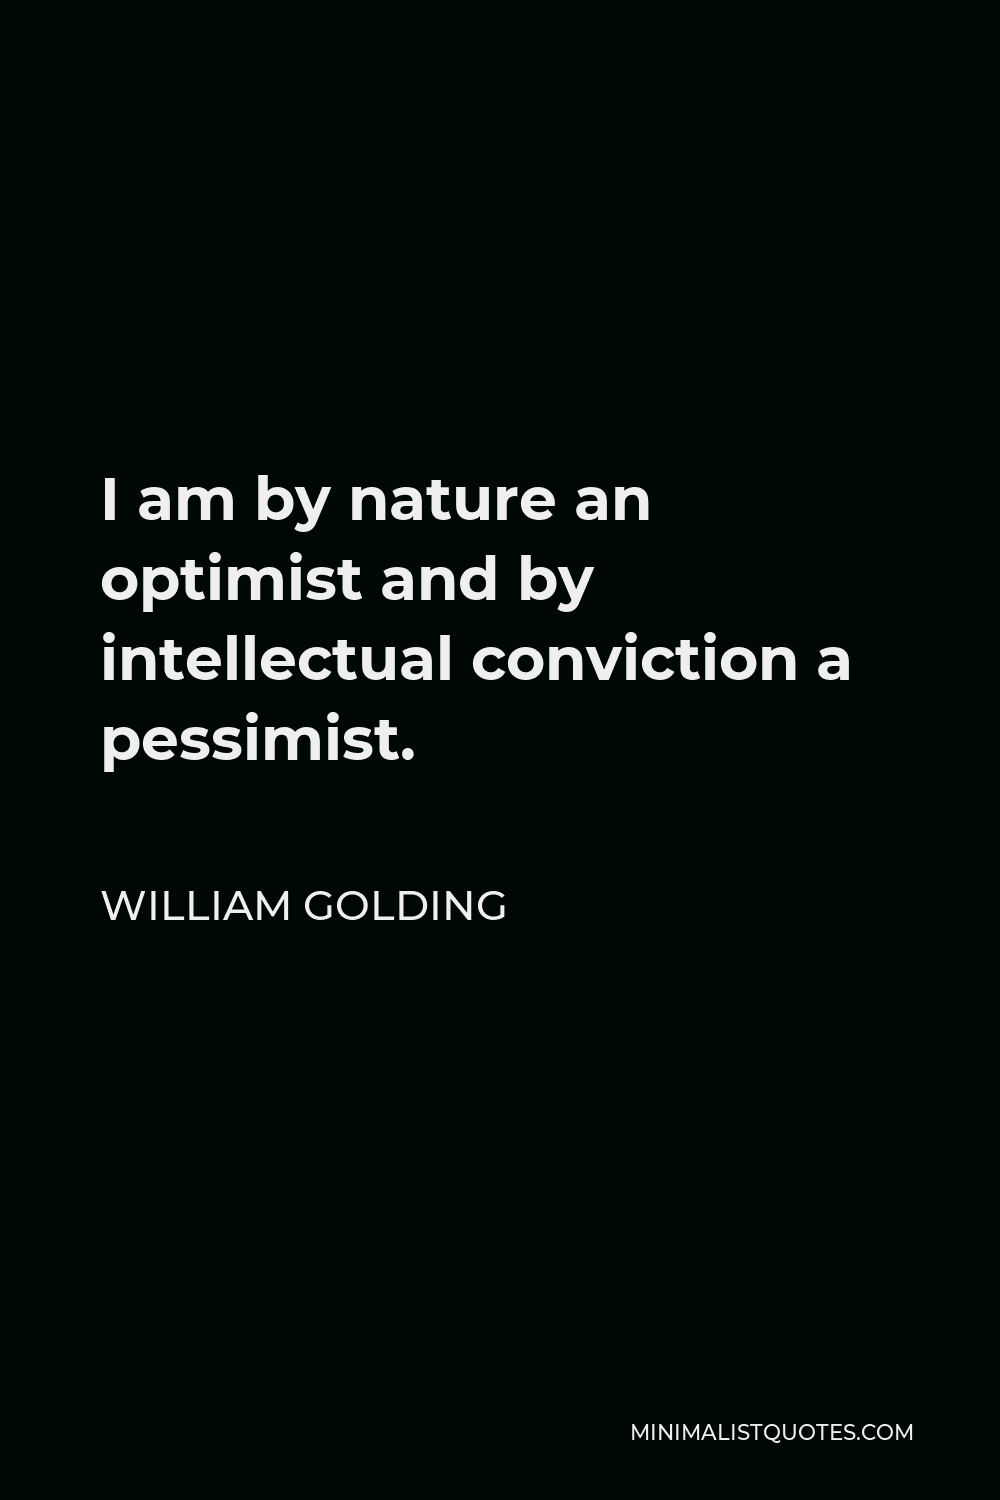 William Golding Quote - I am by nature an optimist and by intellectual conviction a pessimist.